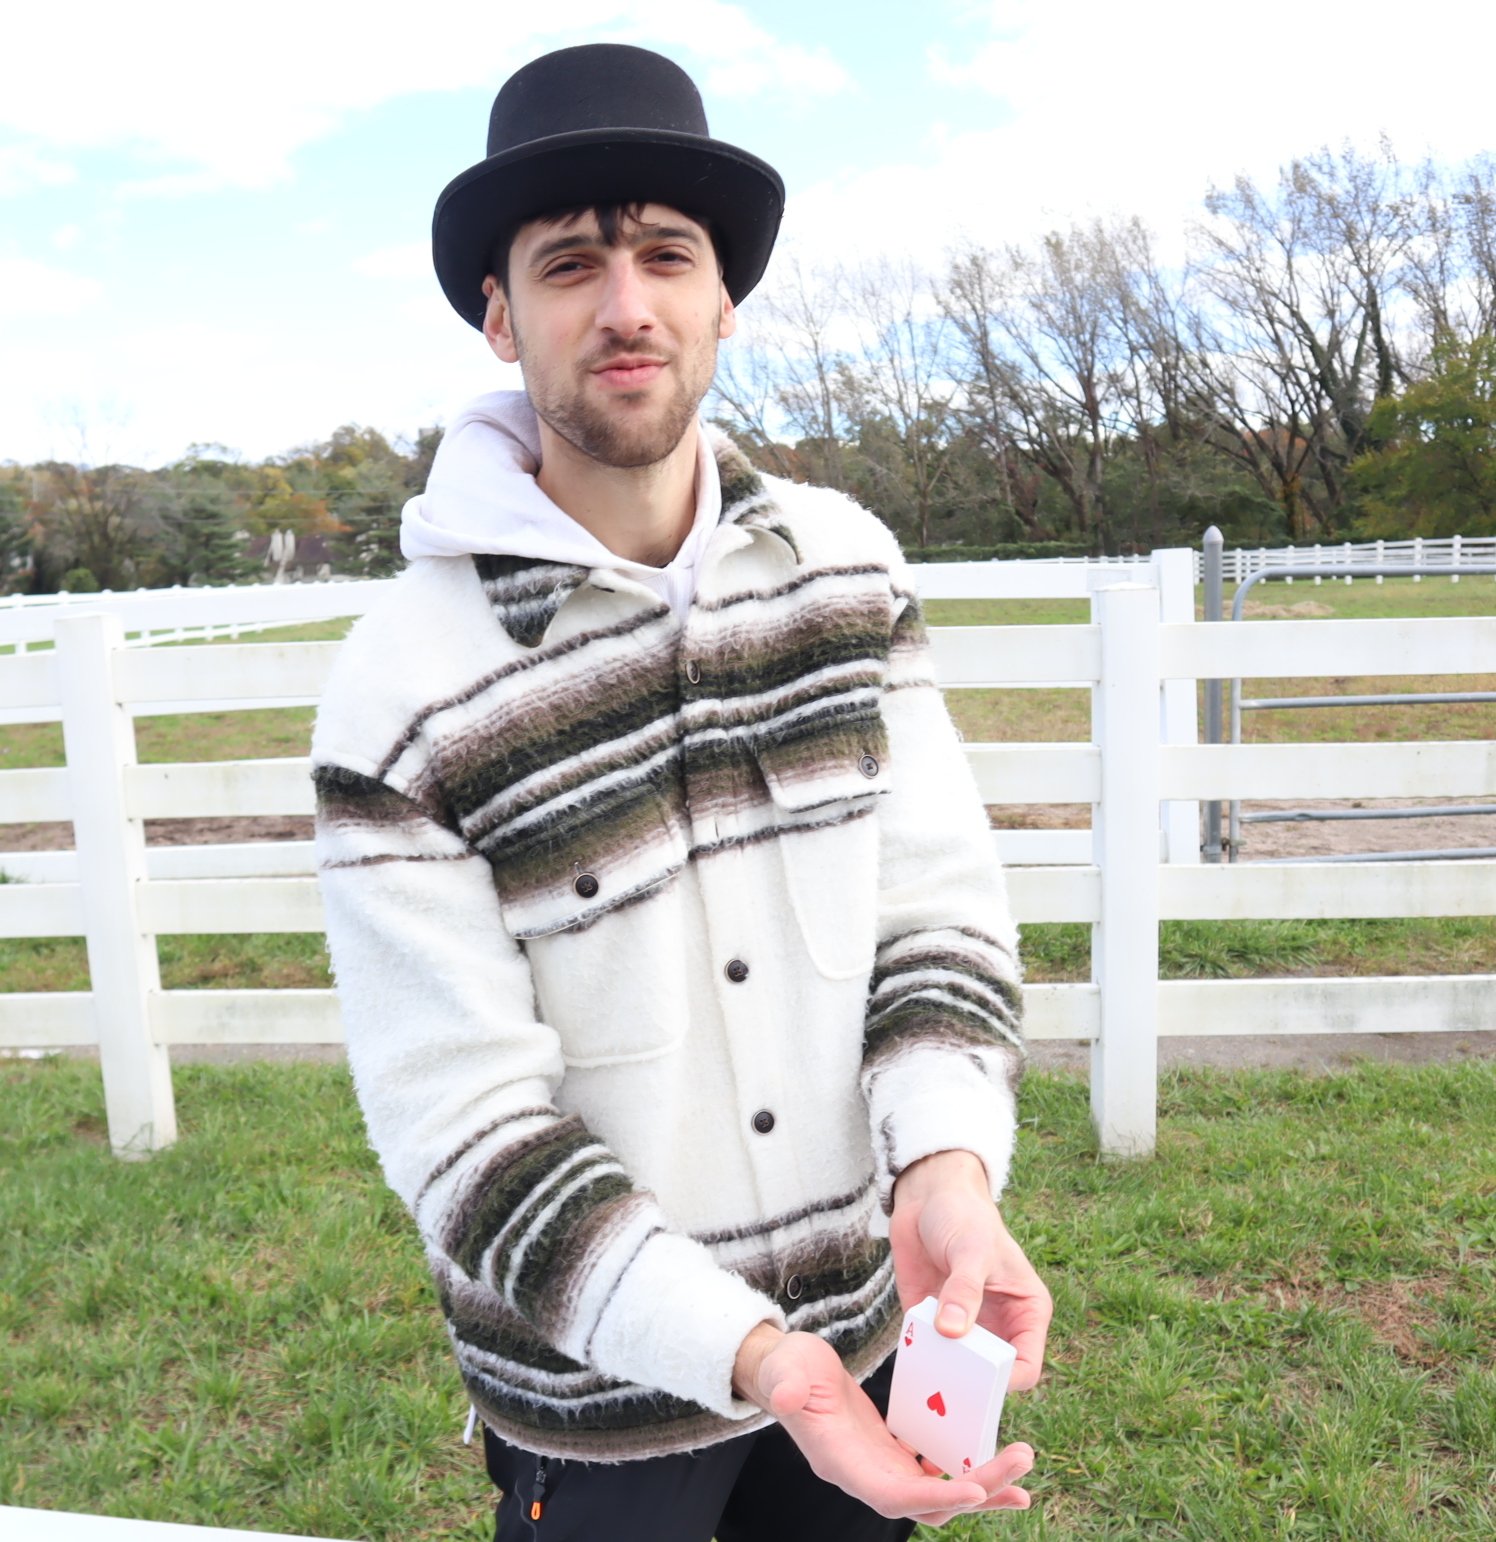 Equine and Chocolate  - Mikey the Magican did card tricks.JPG